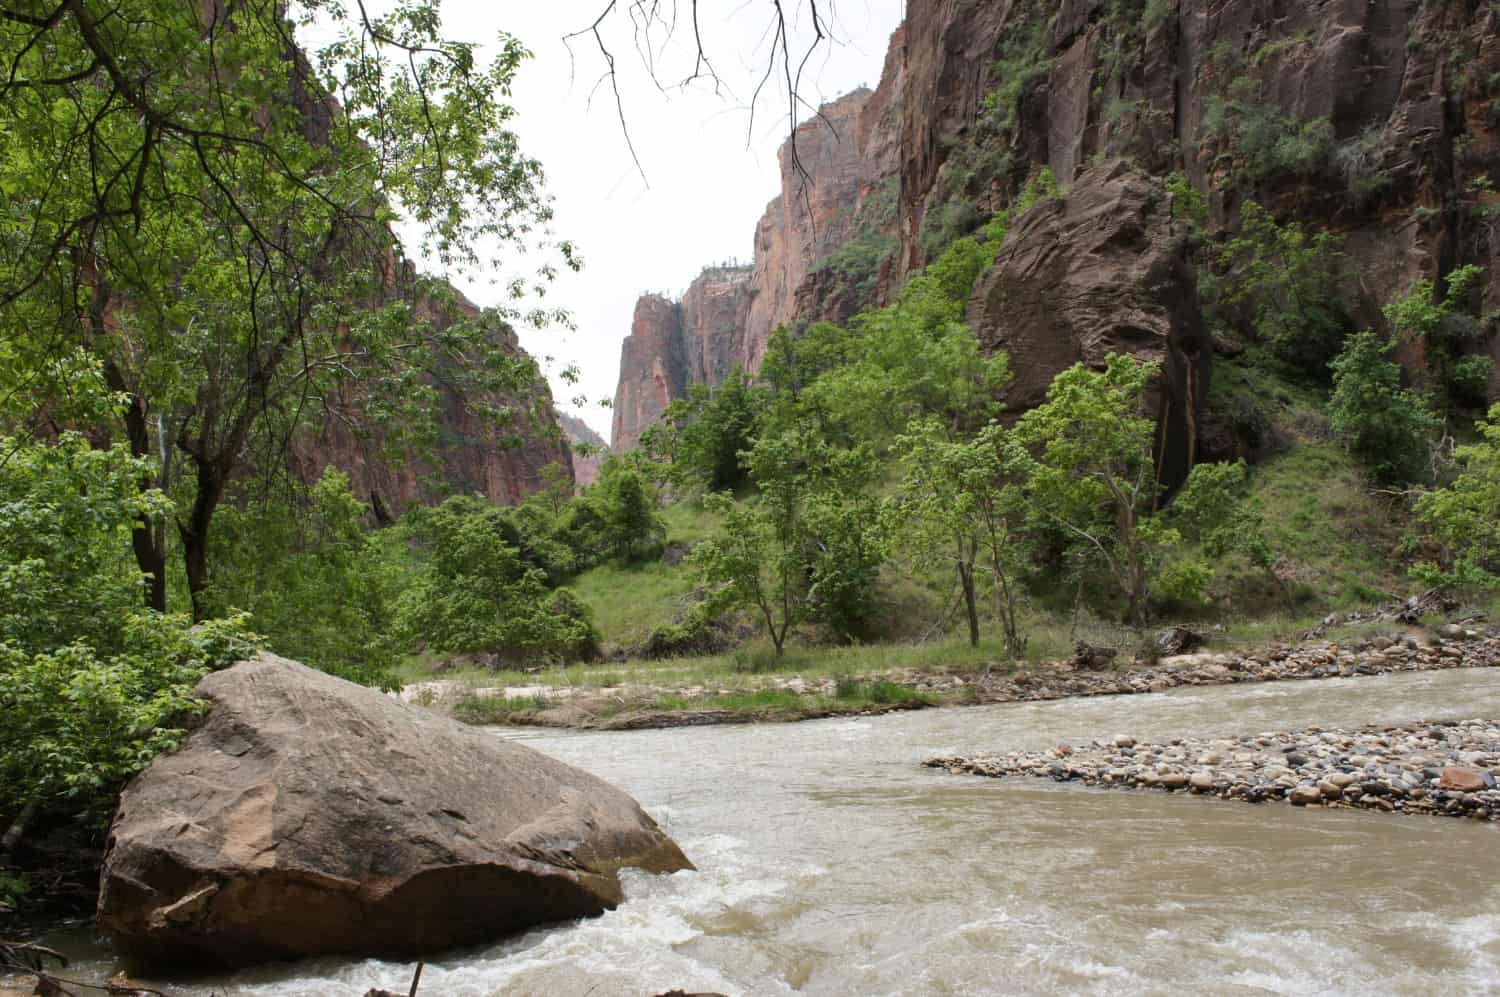 River running in Zion Canyon at Zion National Park, UT